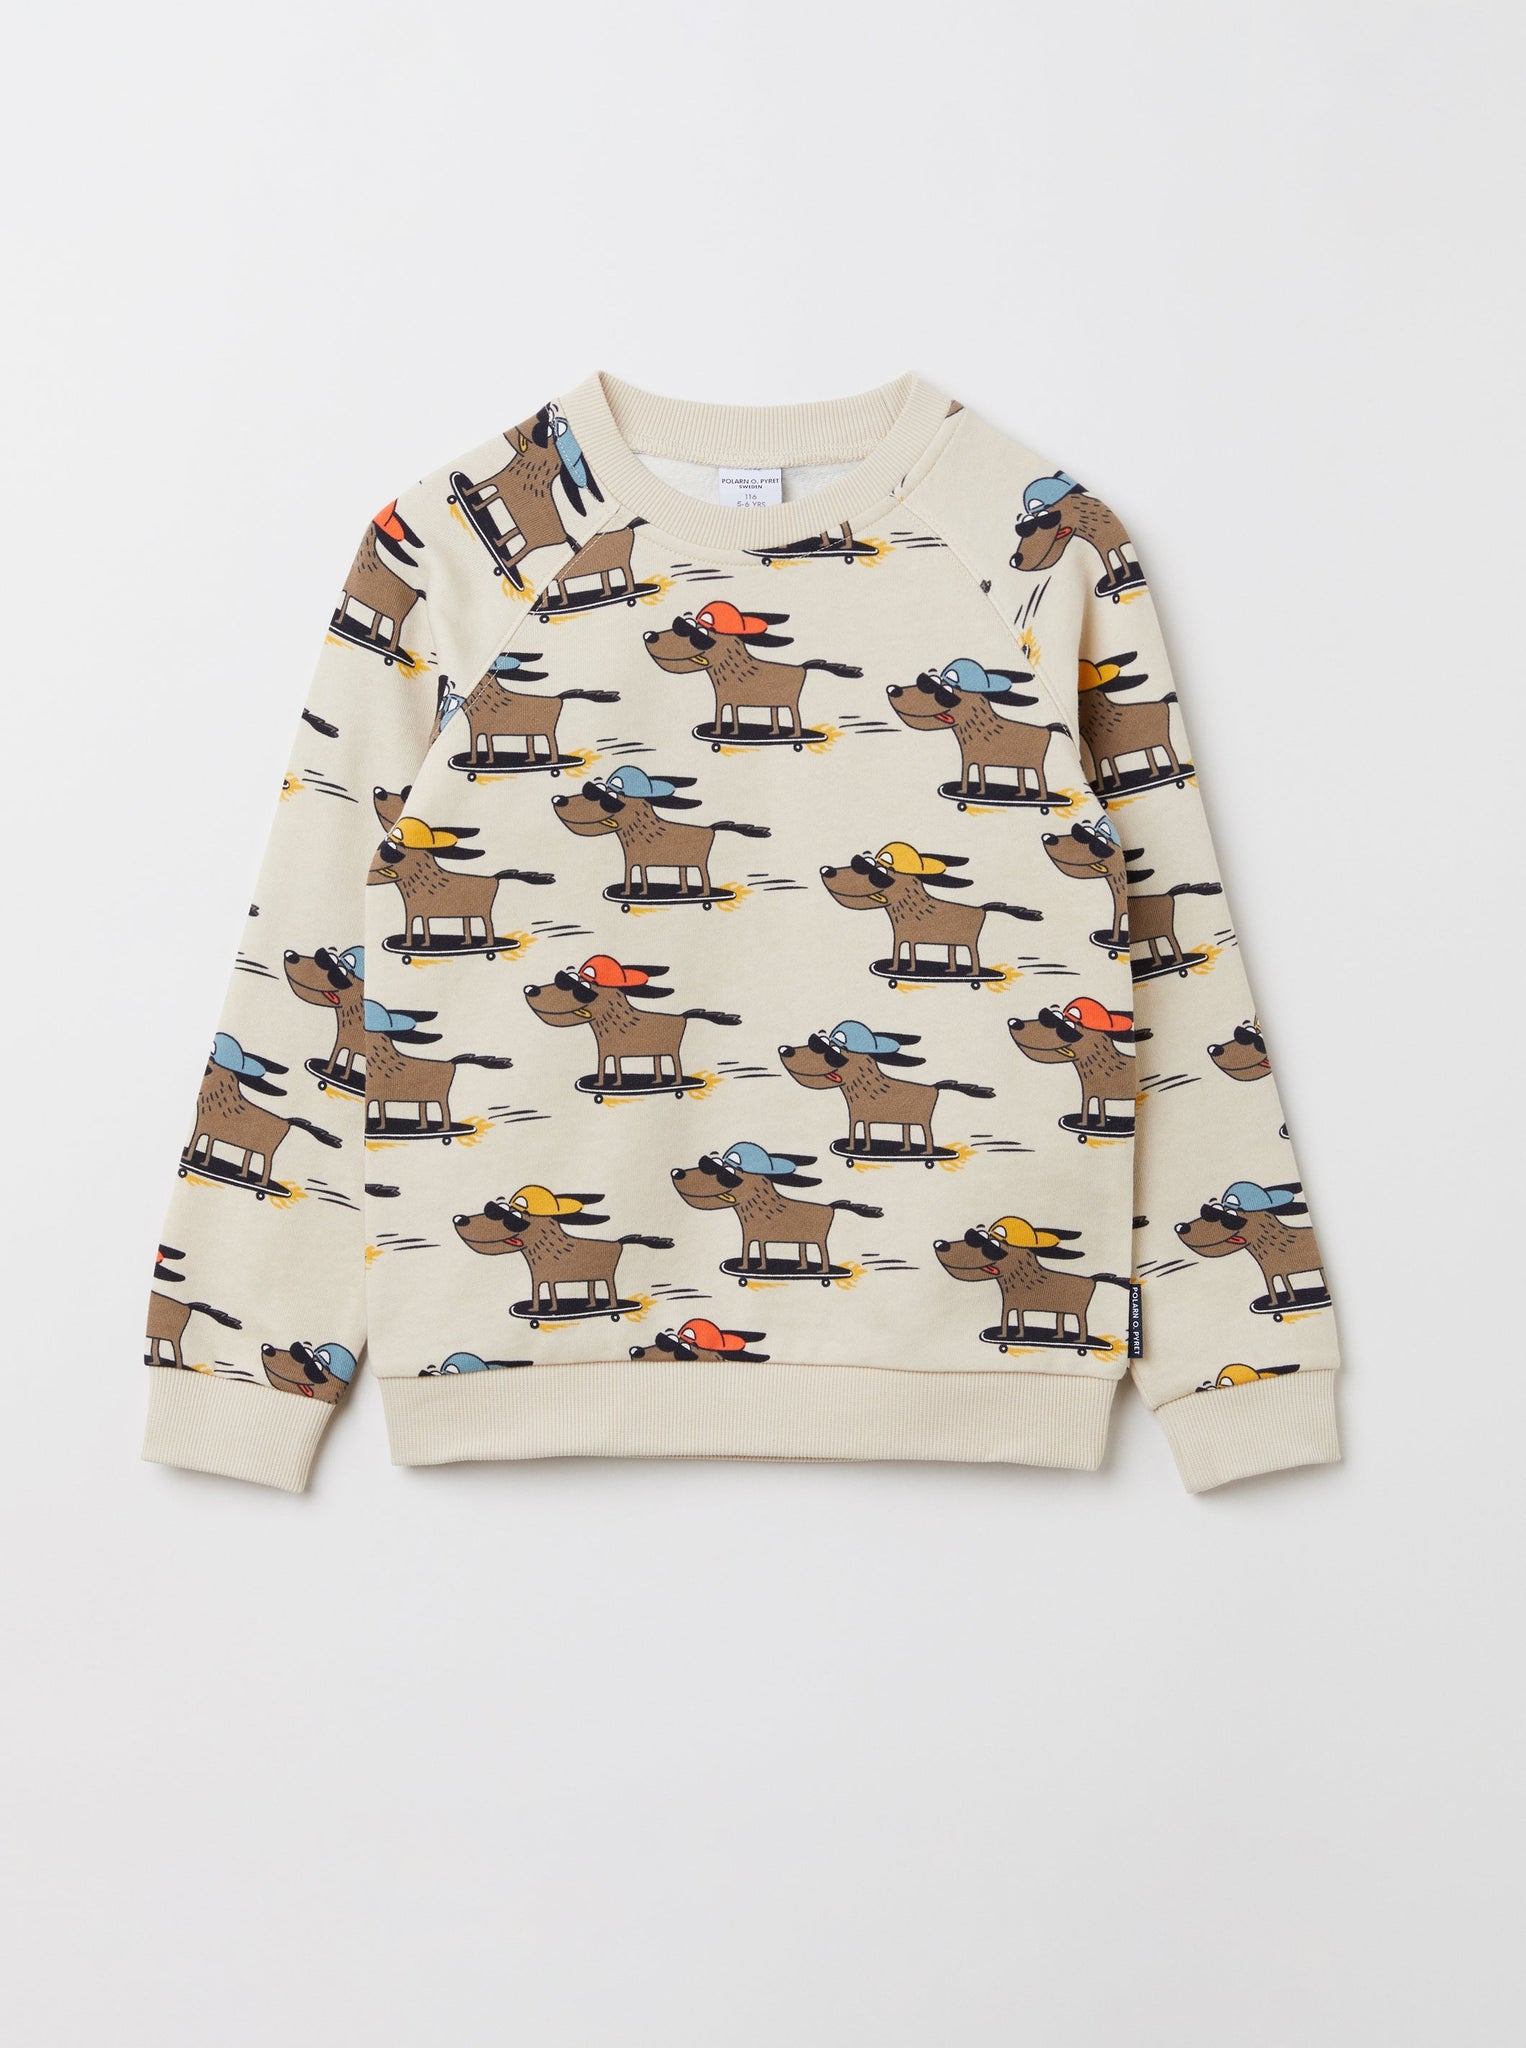 Dog Print Beige Kids Sweatshirt from the Polarn O. Pyret kidswear collection. Clothes made using sustainably sourced materials.